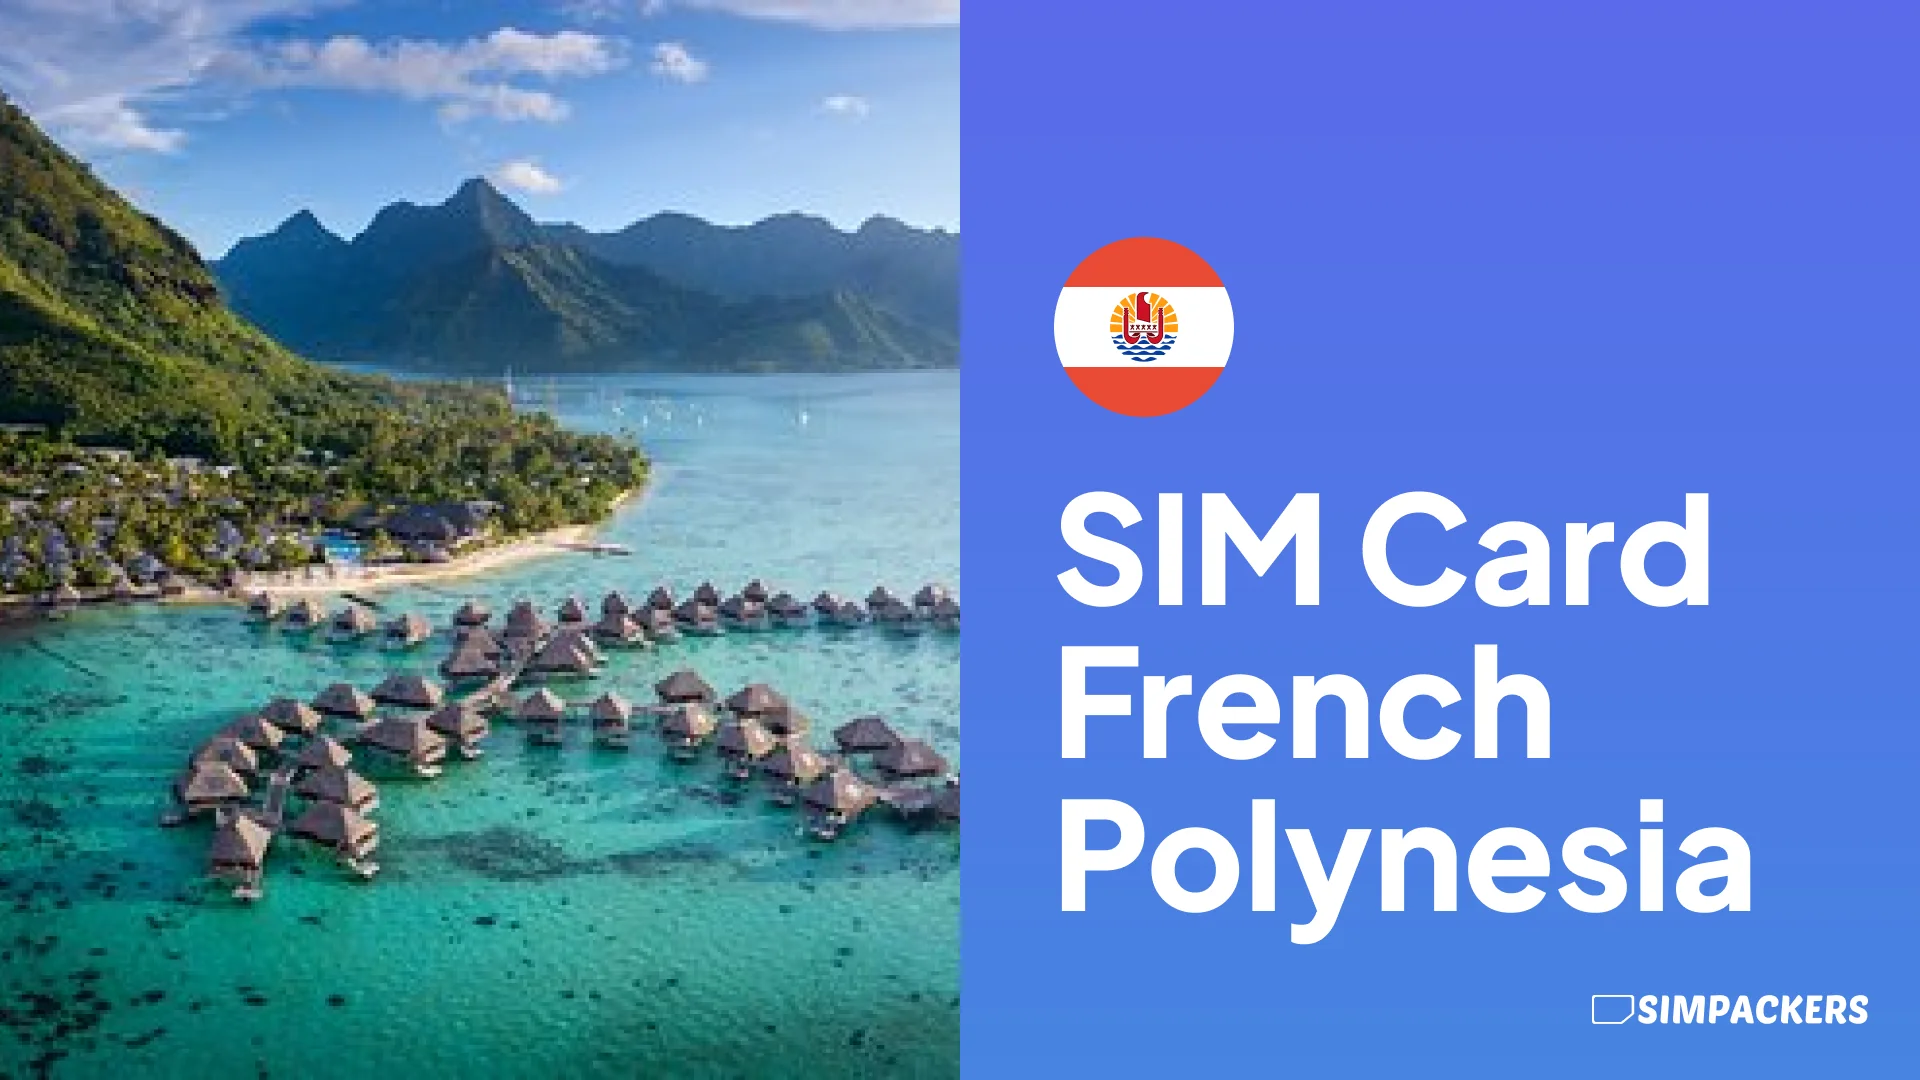 EN/FEATURED_IMAGES/sim-card-french-polynesia.webp